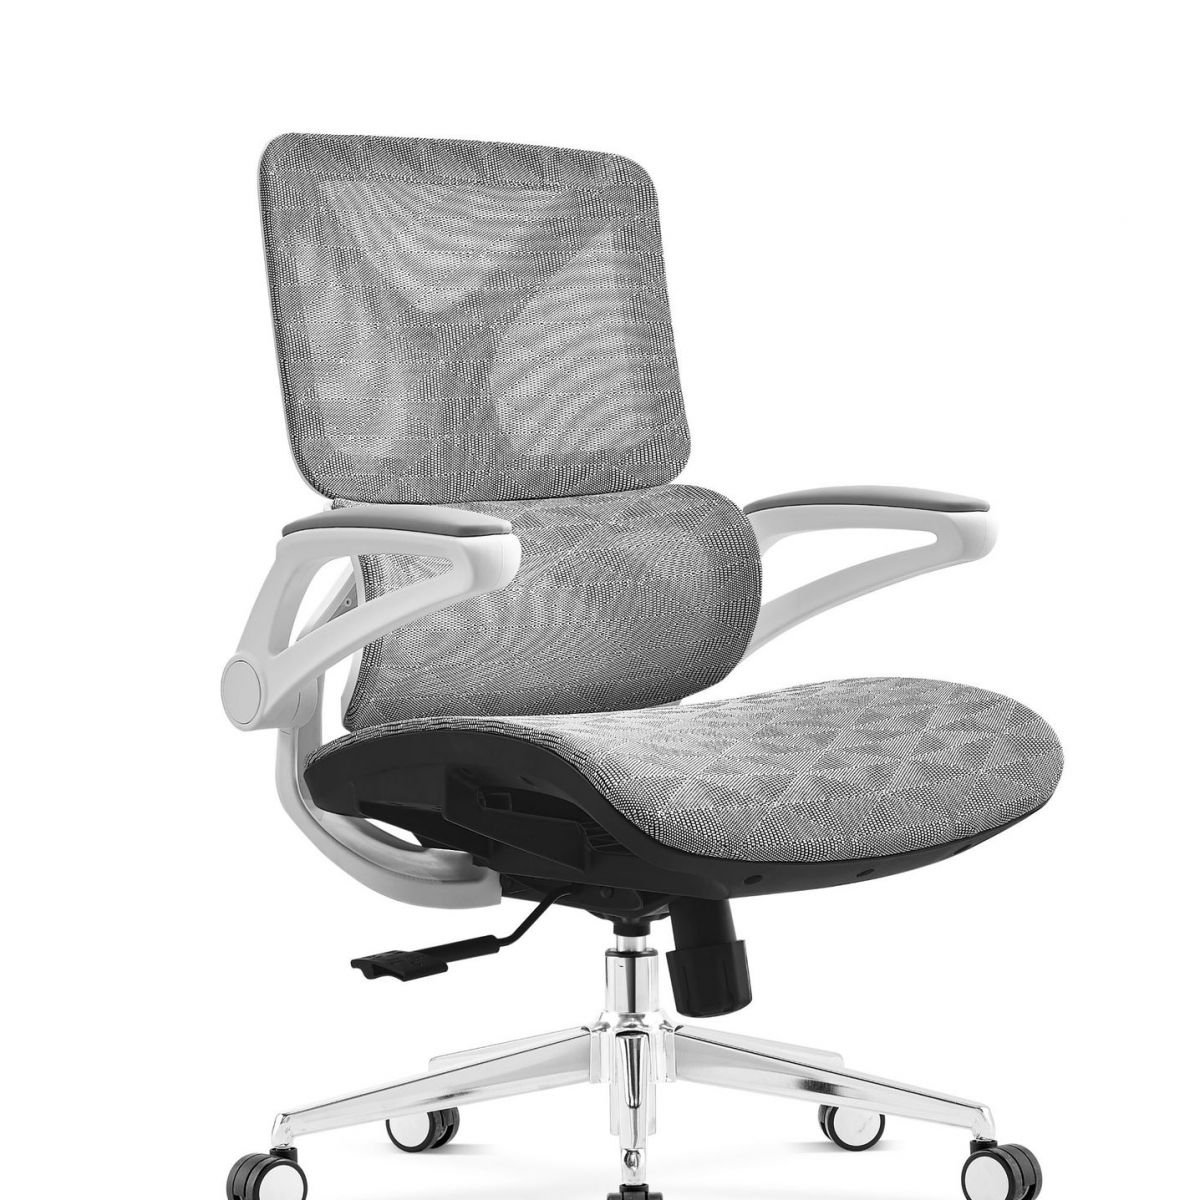 Minimalist Ergonomic Waterfall Seat Mesh Task Chair in Light Gray with Tilt Lock and Lumbar Support, Grey, Without Headrest